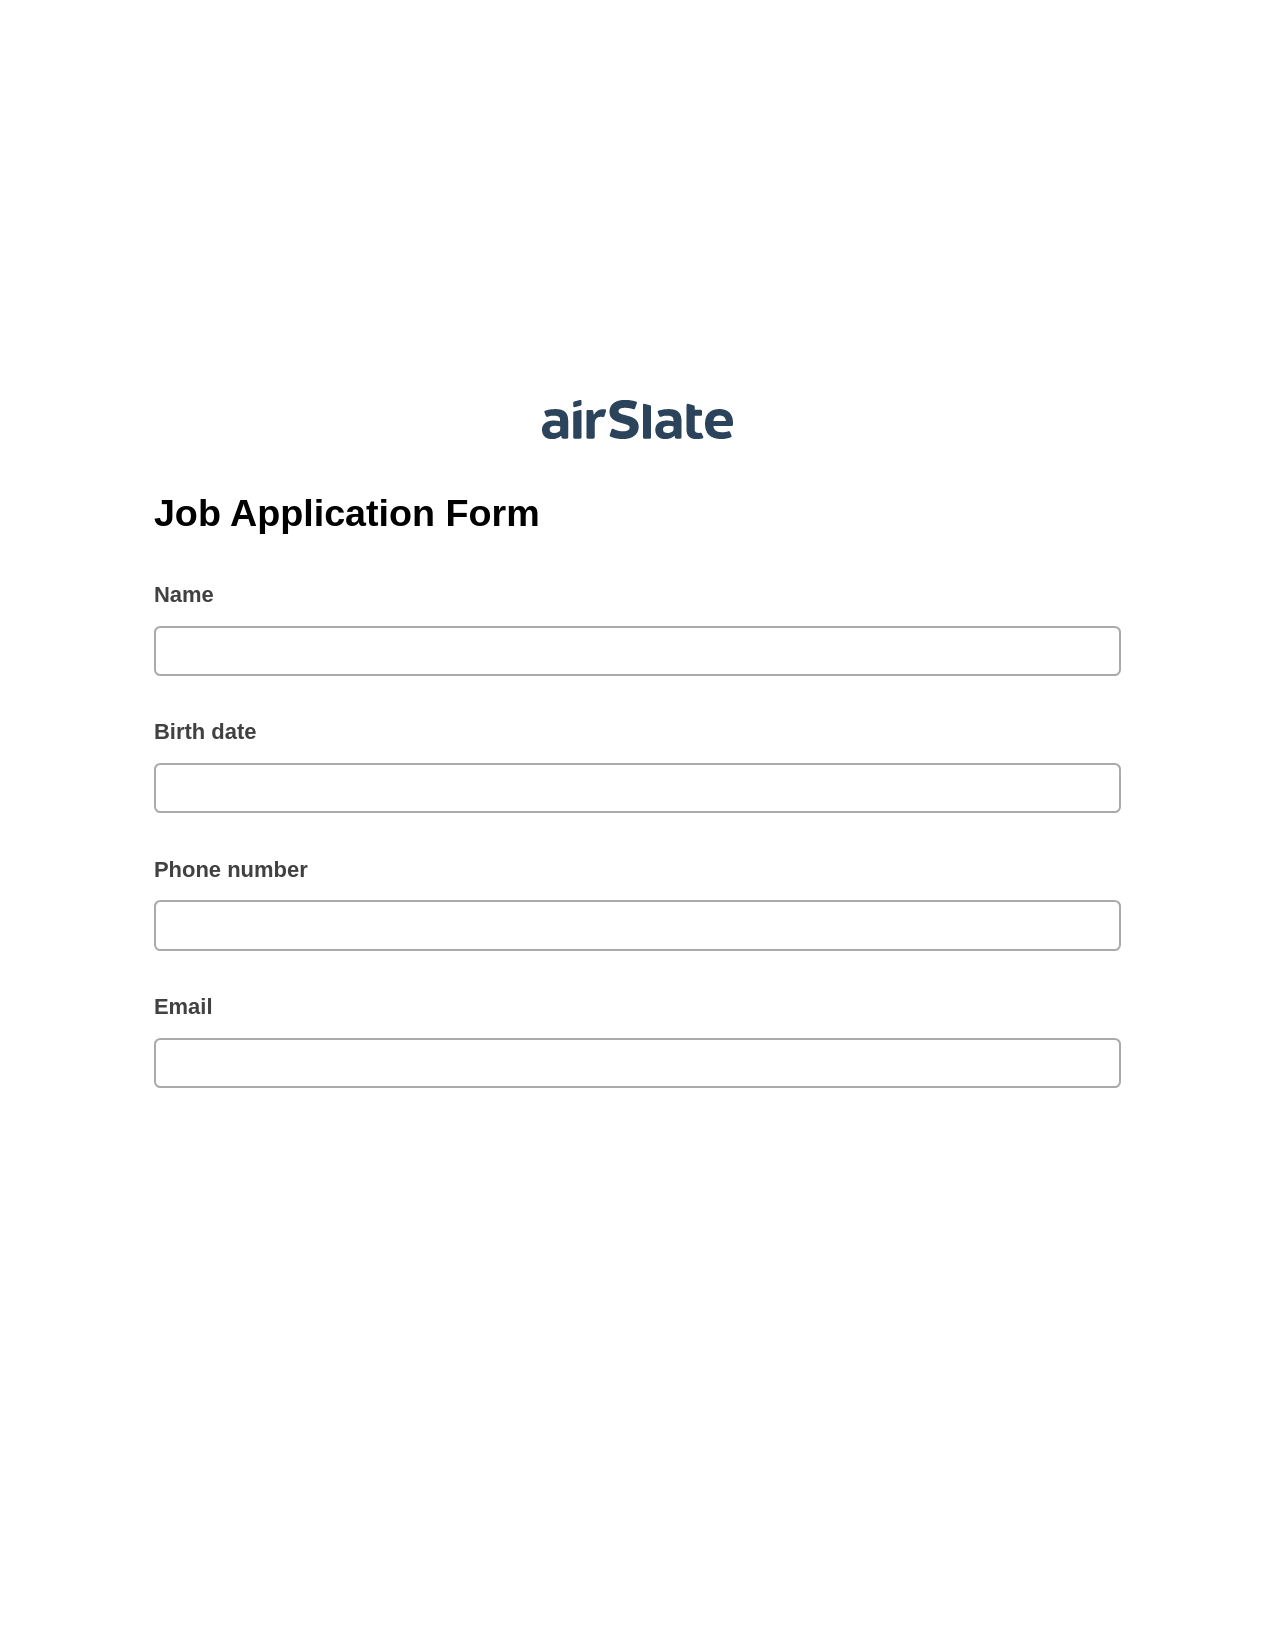 Multirole Job Application Form Pre-fill from CSV File Bot, Remove Tags From Slate Bot, Export to Formstack Documents Bot